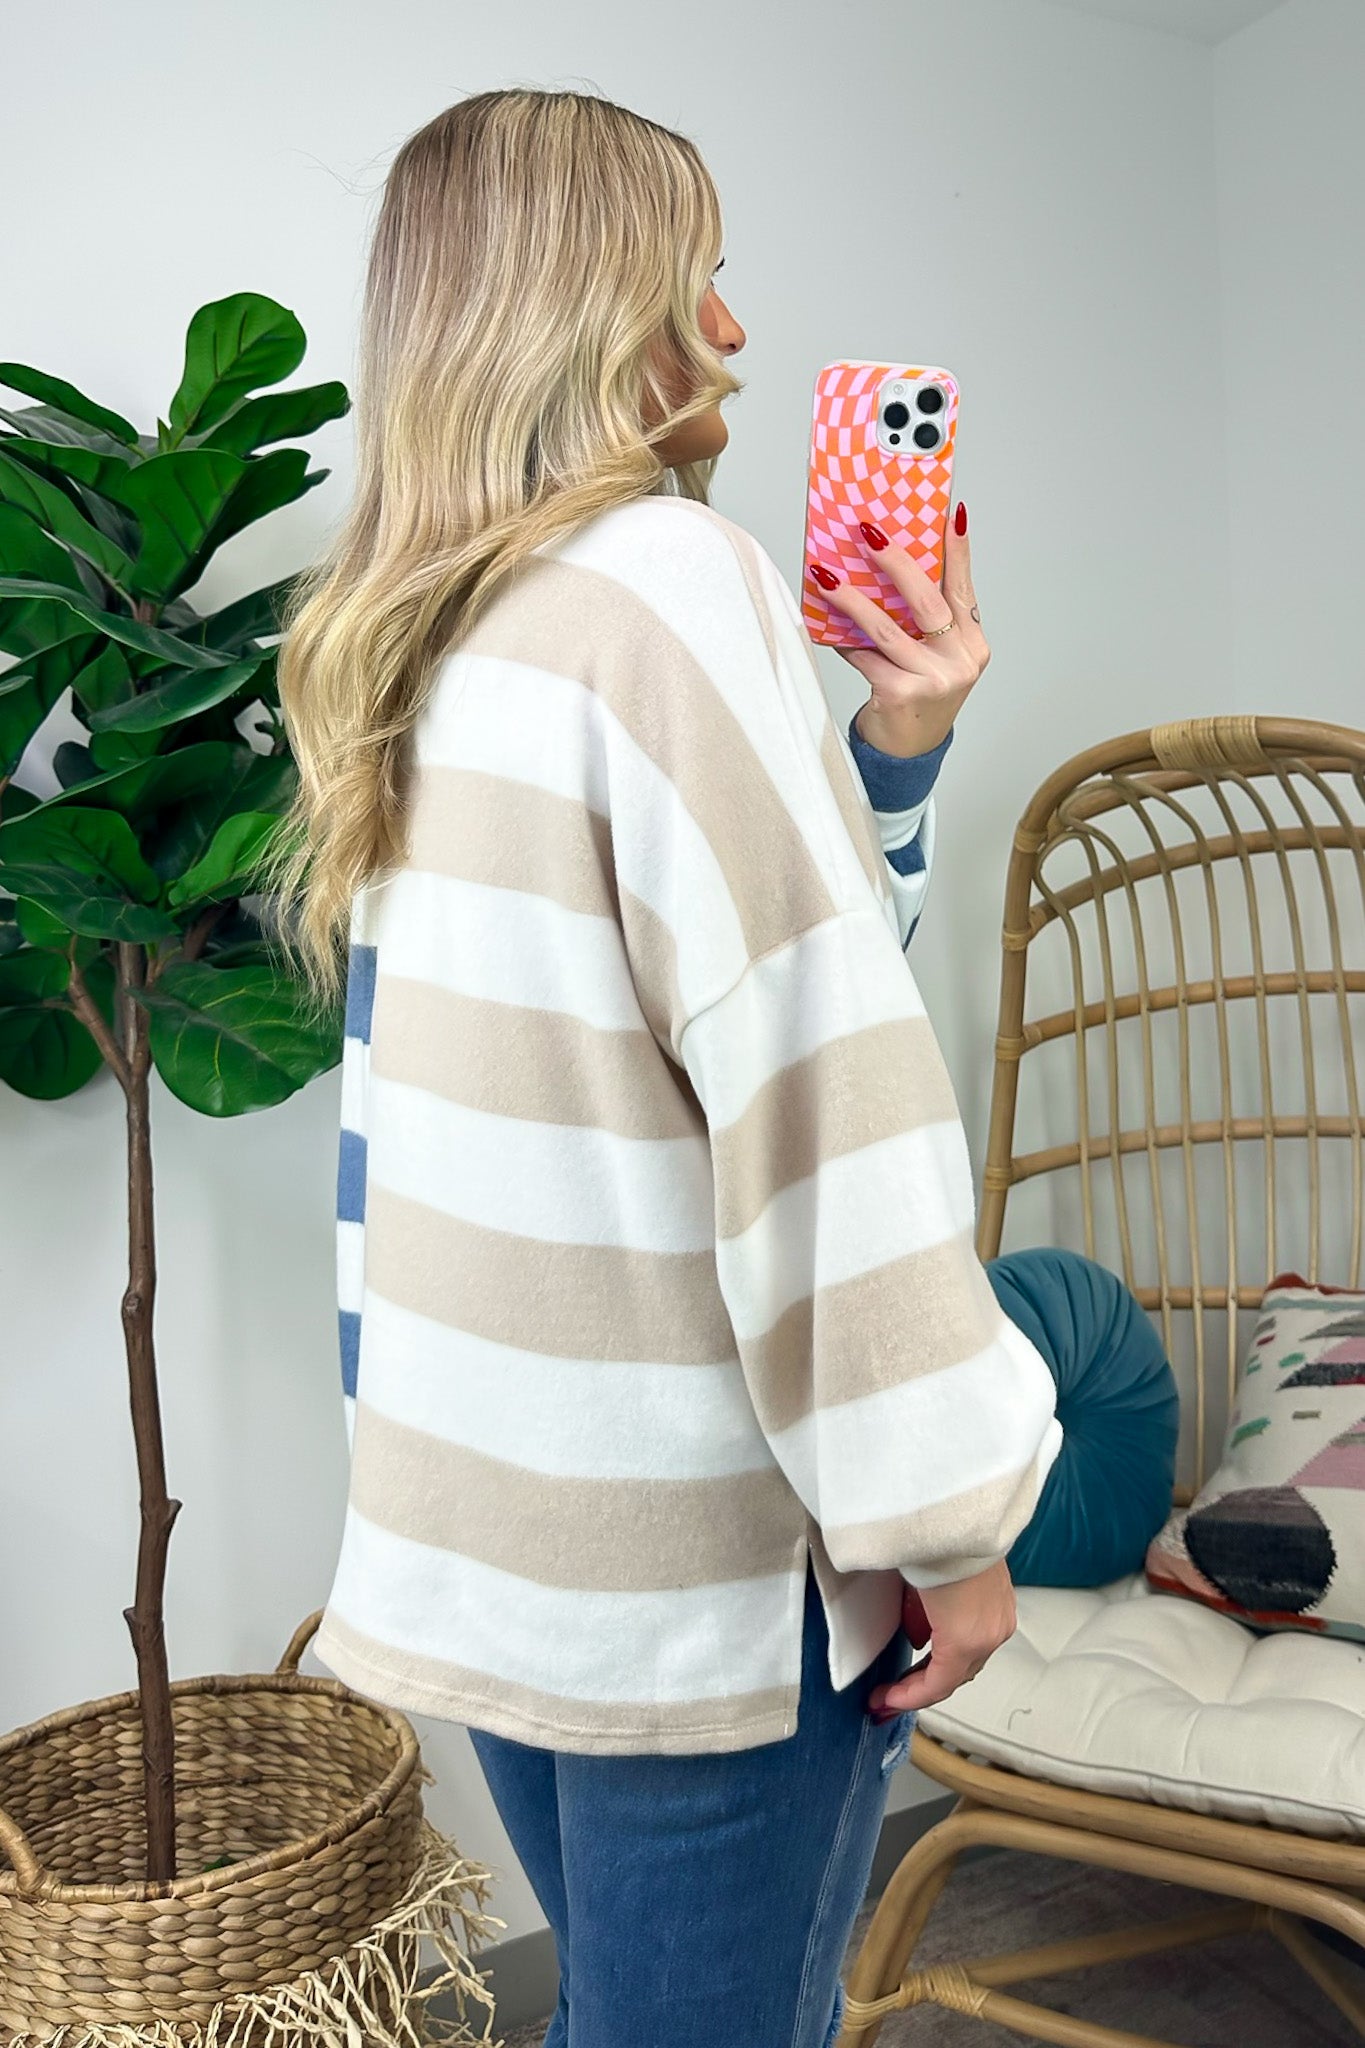  Annadale Oversized Striped Contrast Sweater - FINAL SALE - Madison and Mallory